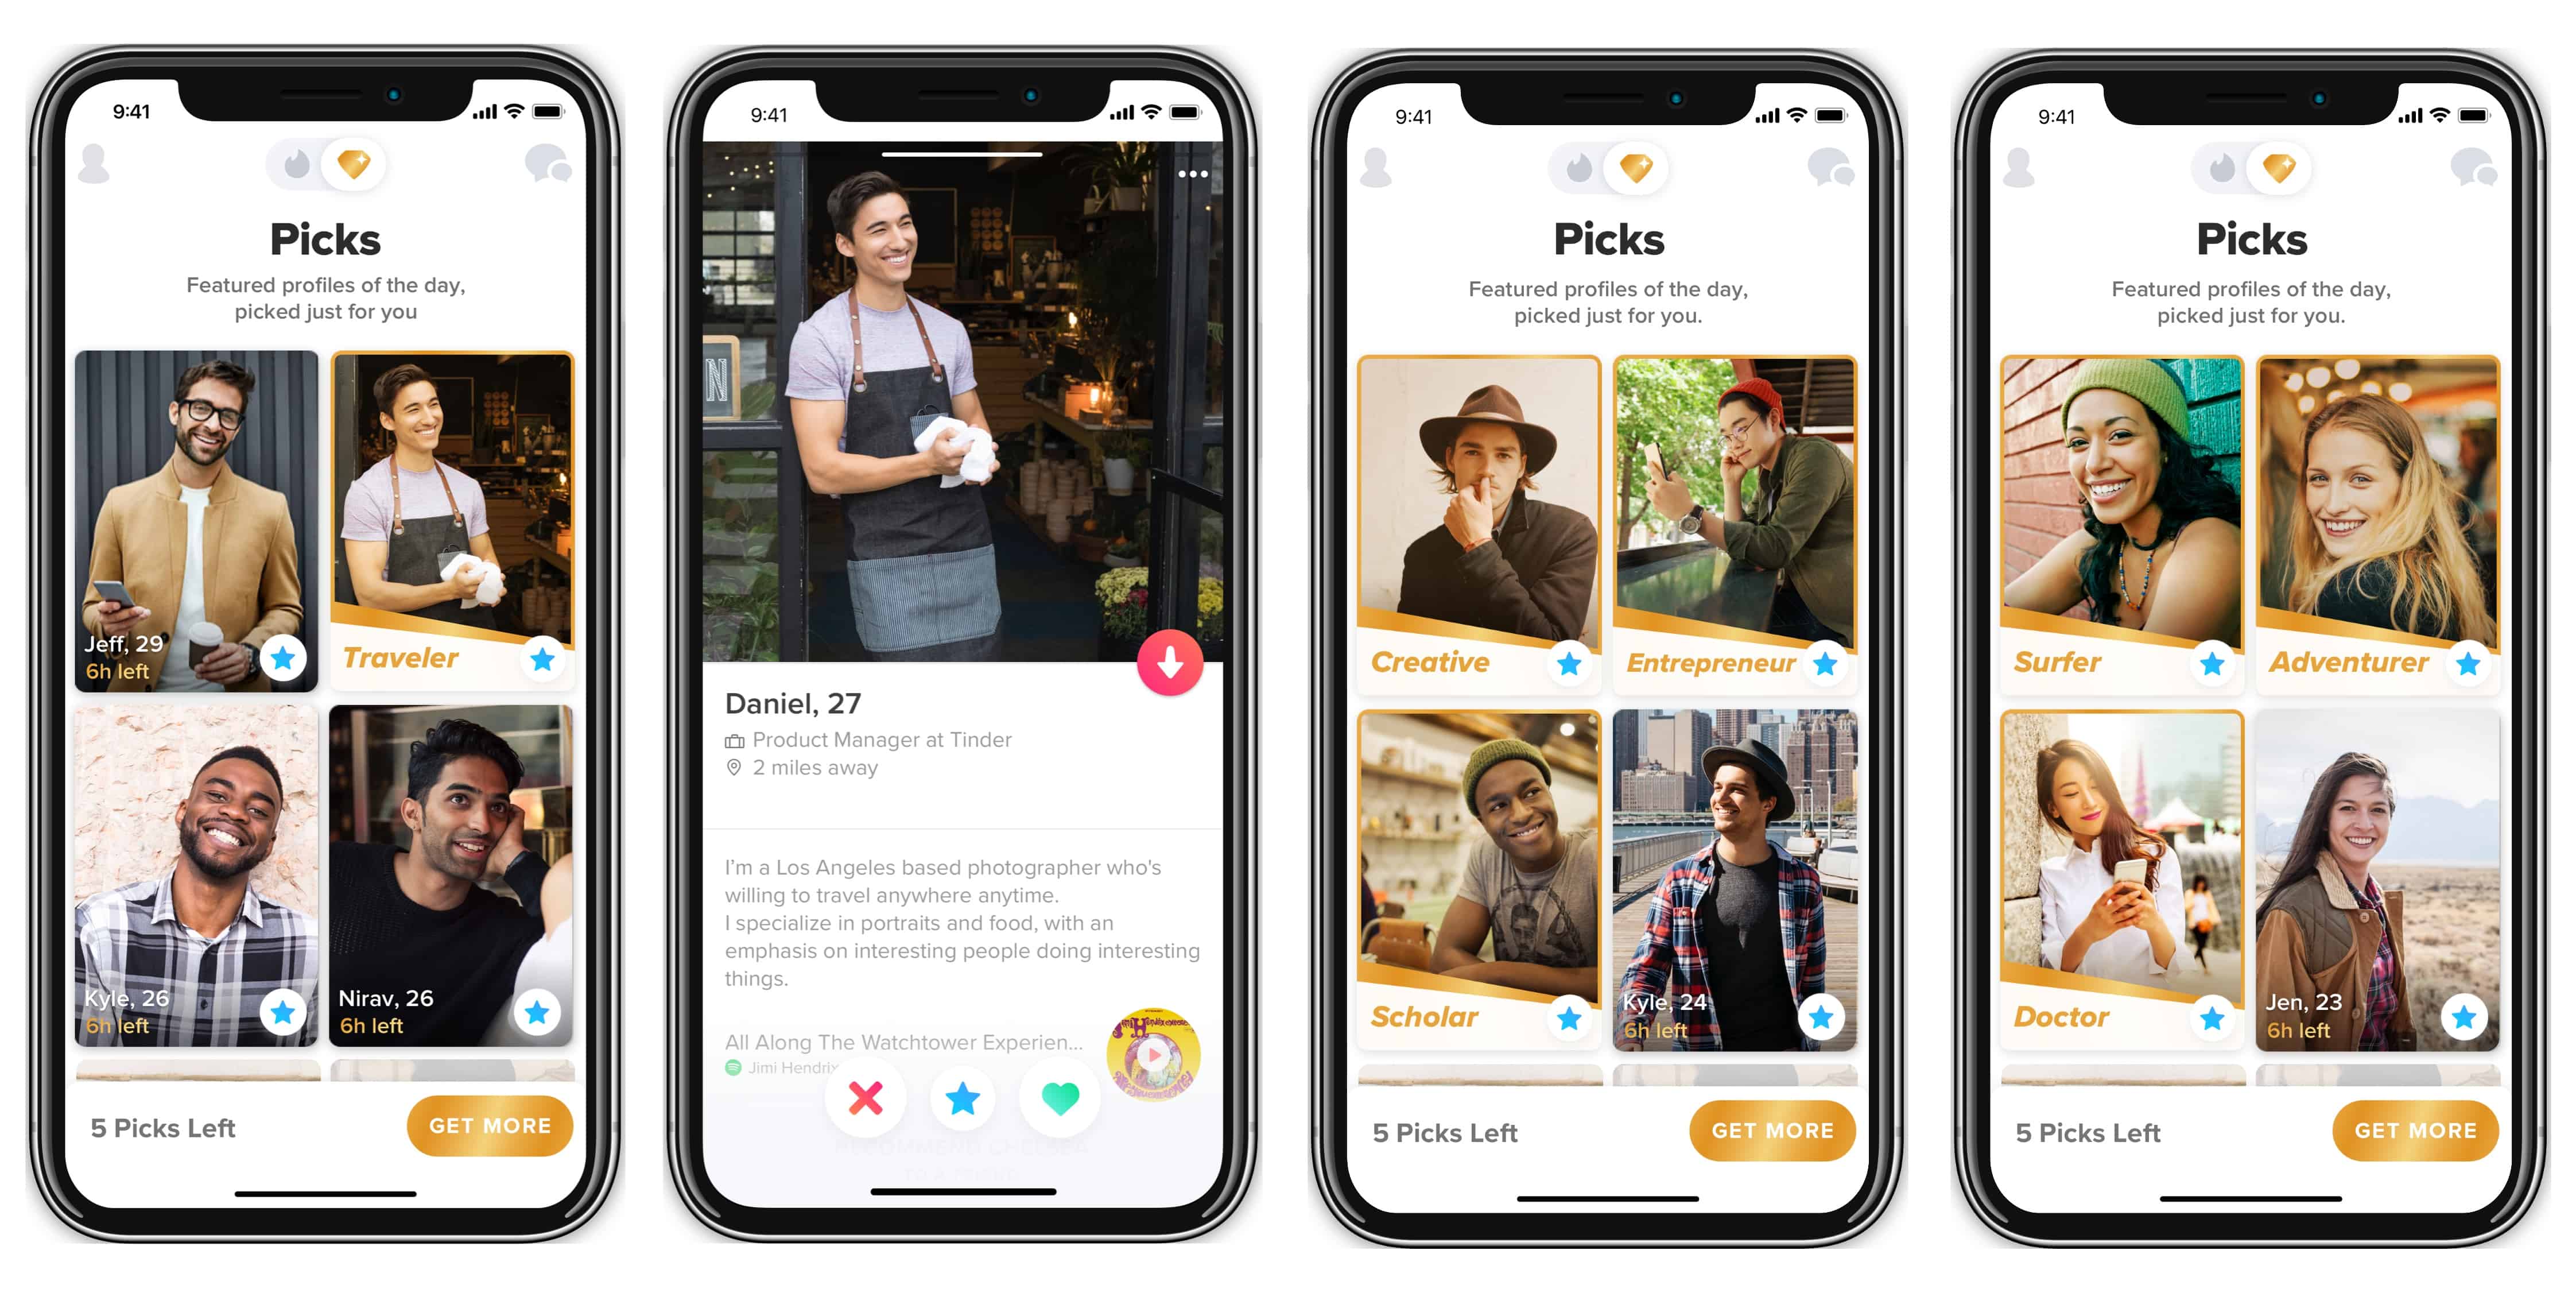 Tinder Picks currently only for iPhone